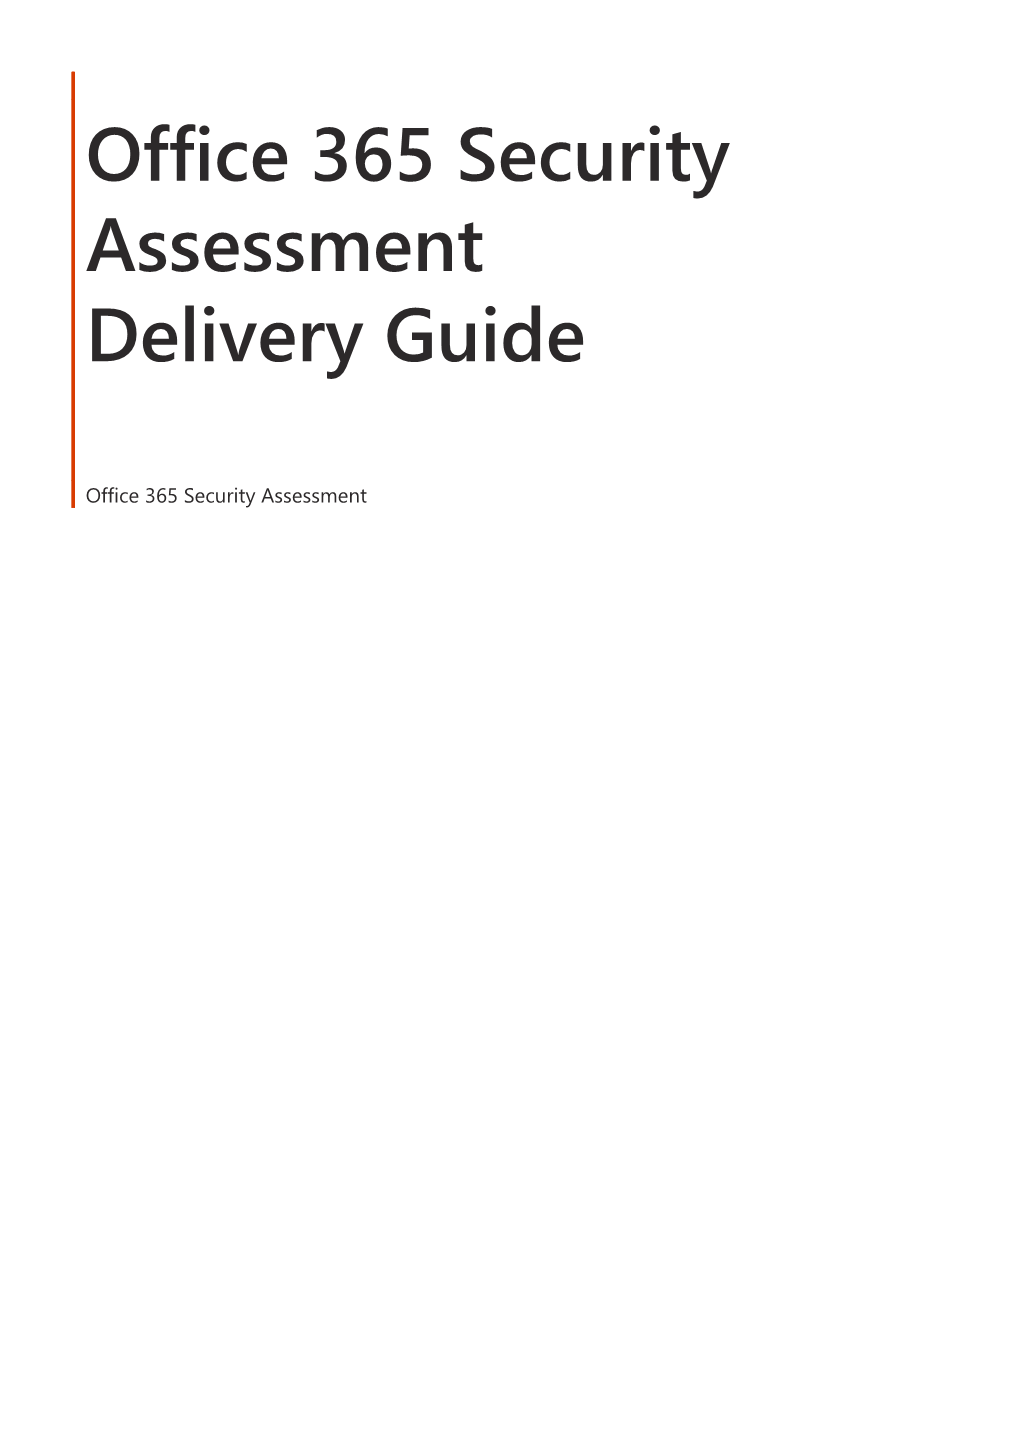 Office 365 Security Assessment Delivery Guide